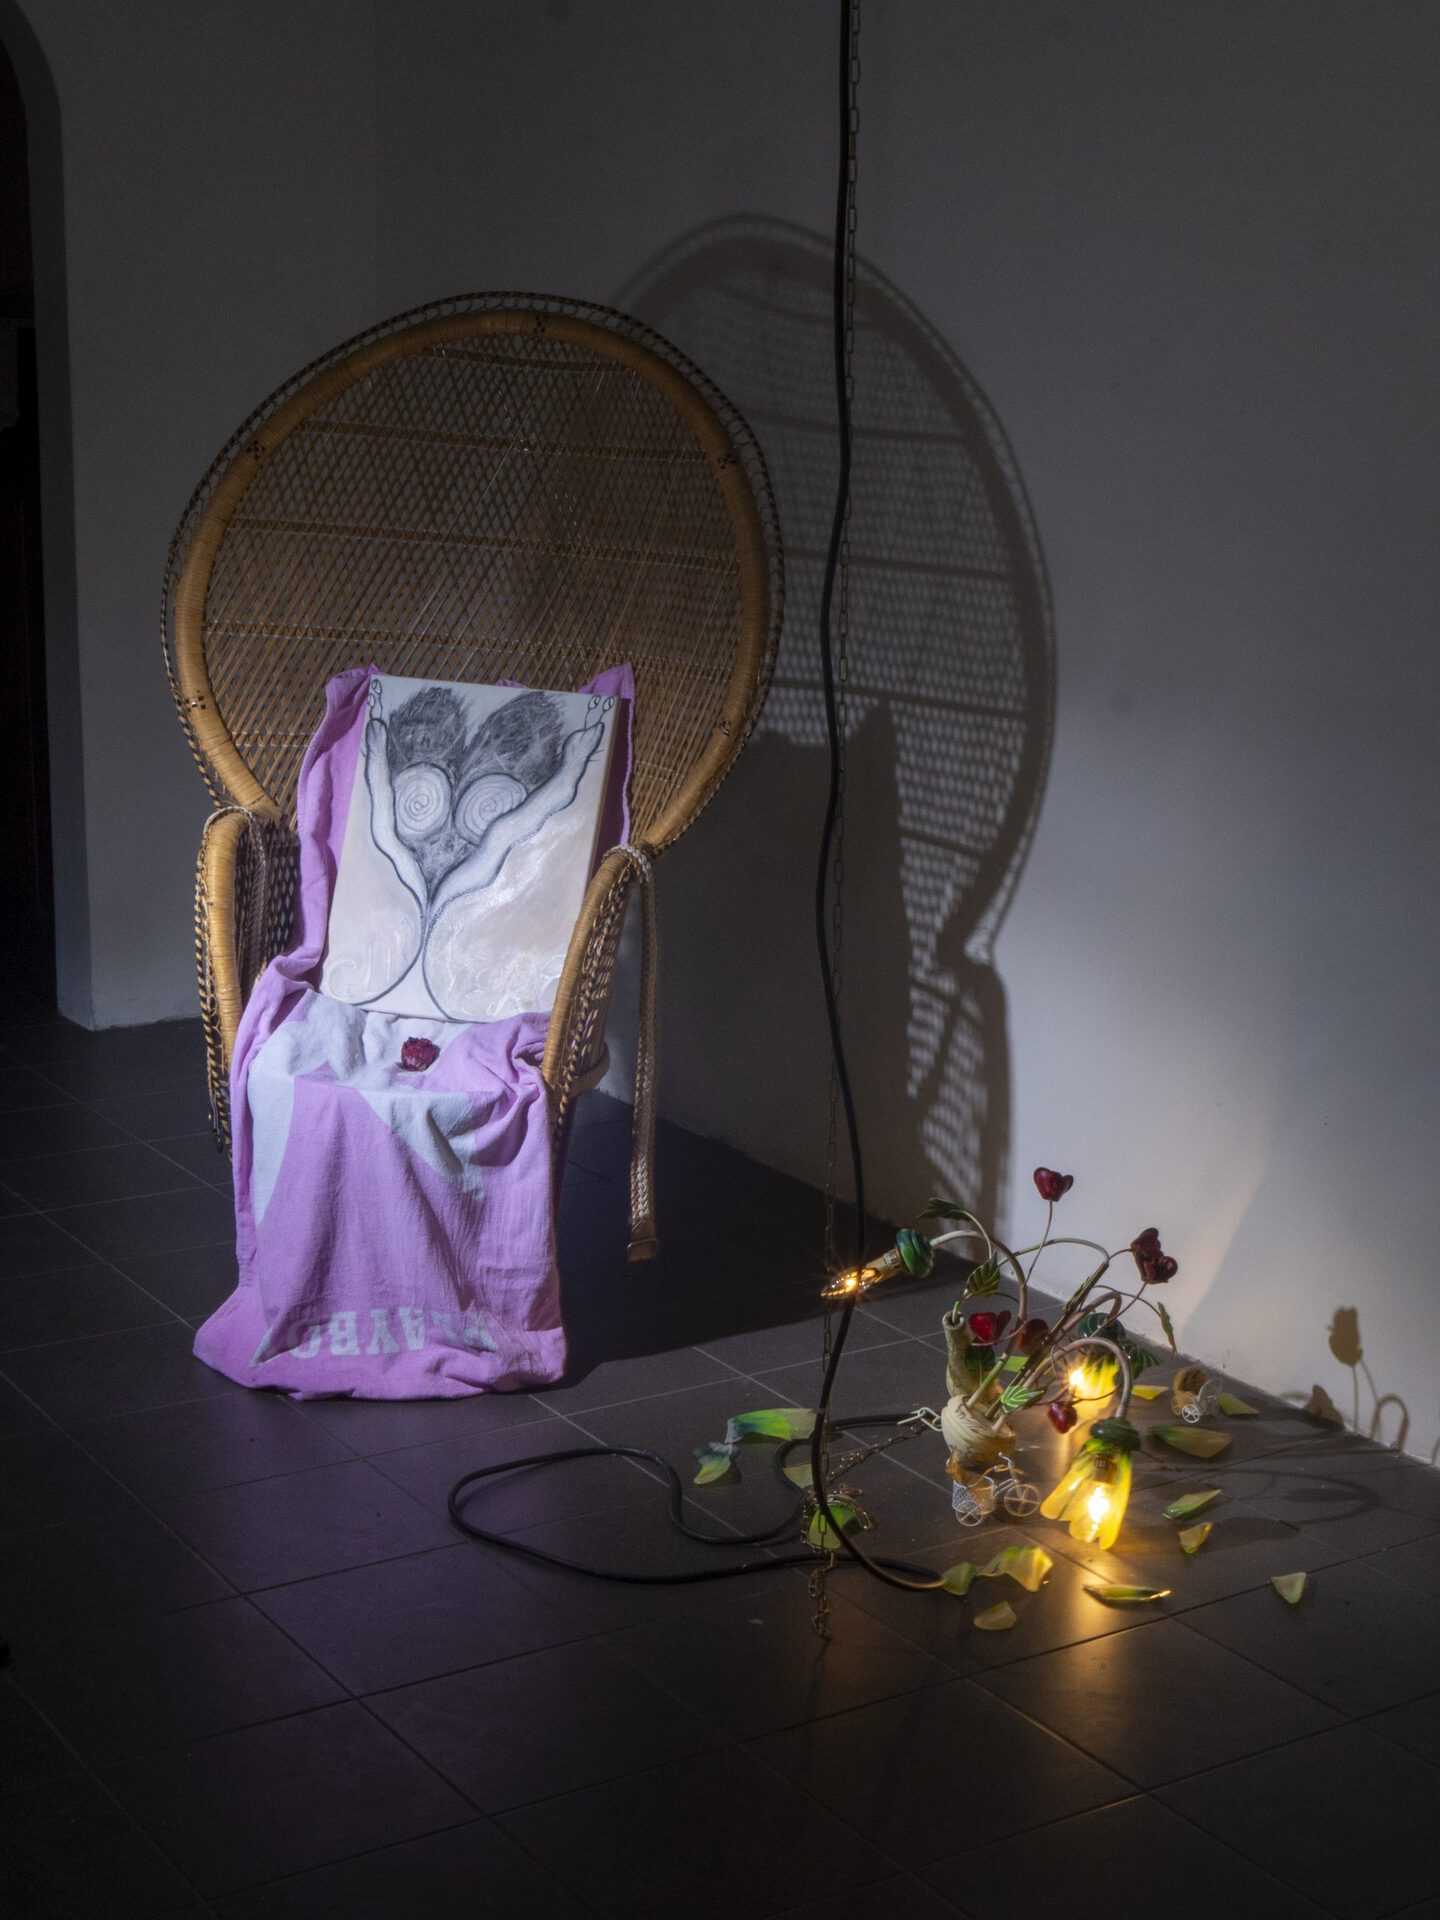 Hatice Pinarbasi - 2022 - oil and make up on canvas, Emmanuelle Chair, Playboy bath towel, waxed rose, lamp with miniature paintings, chains-